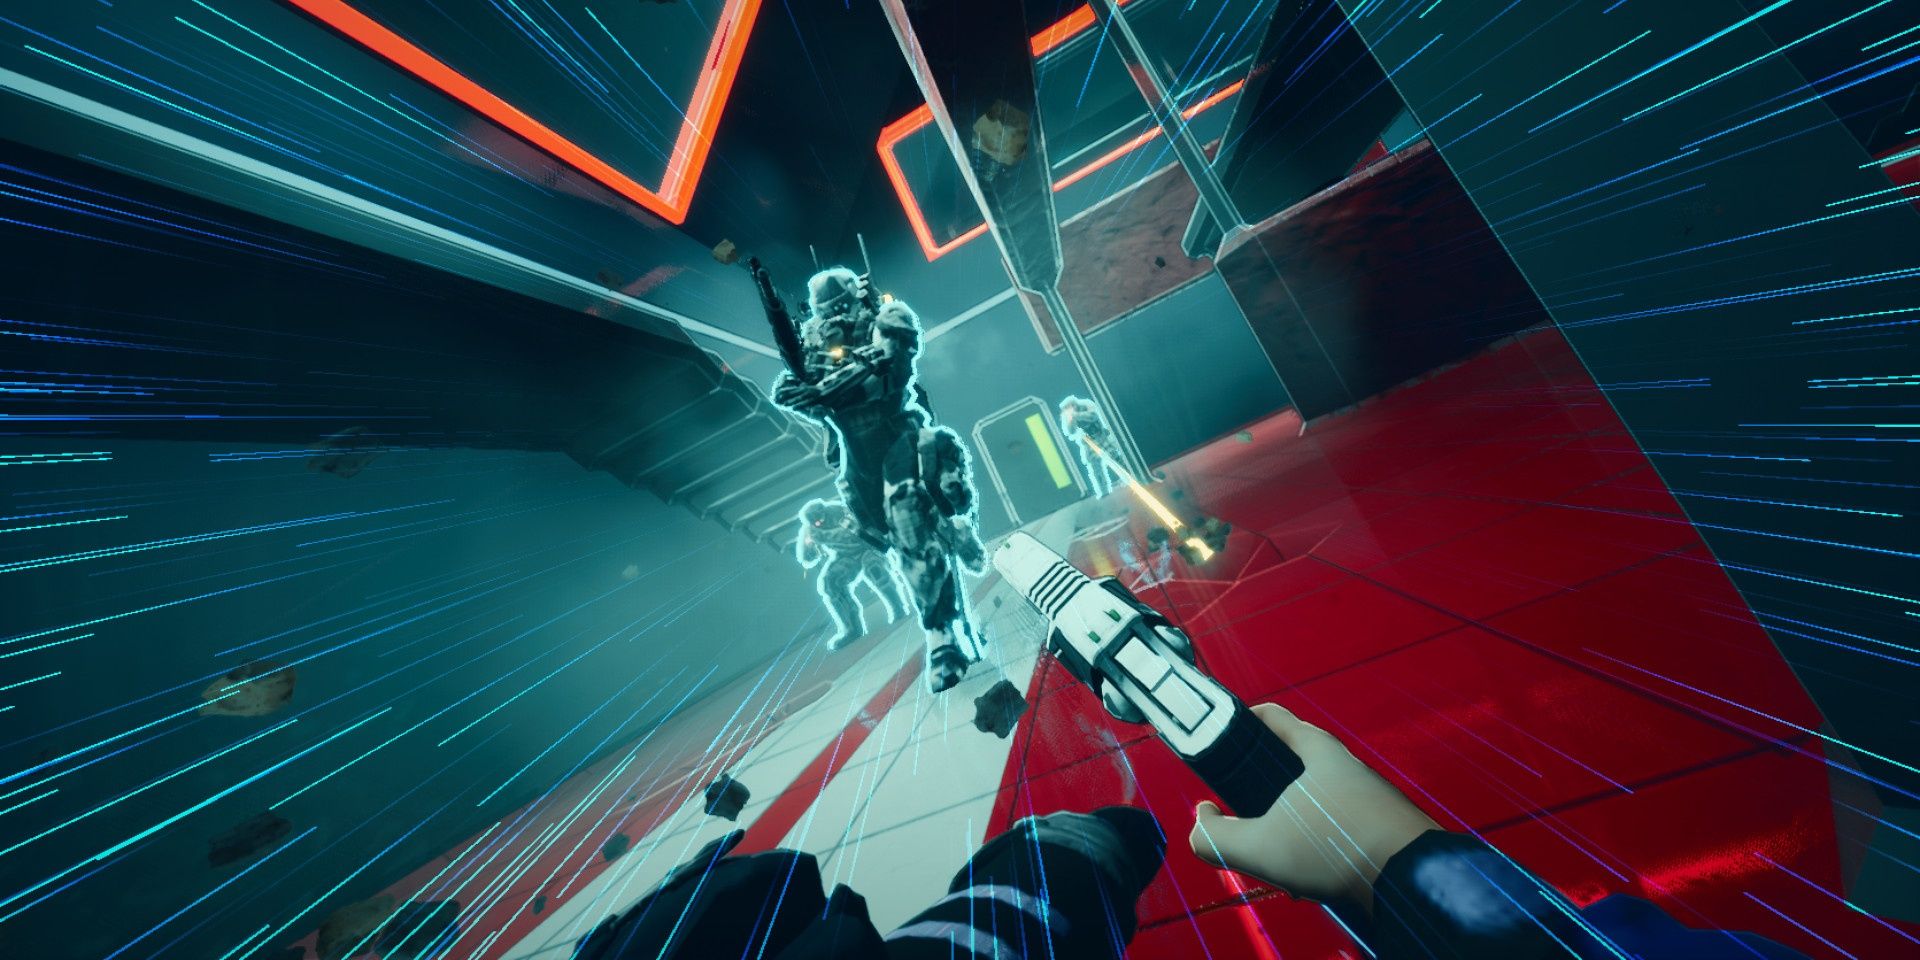 A player sliding towards an enemy and shooting them in Severed Steel